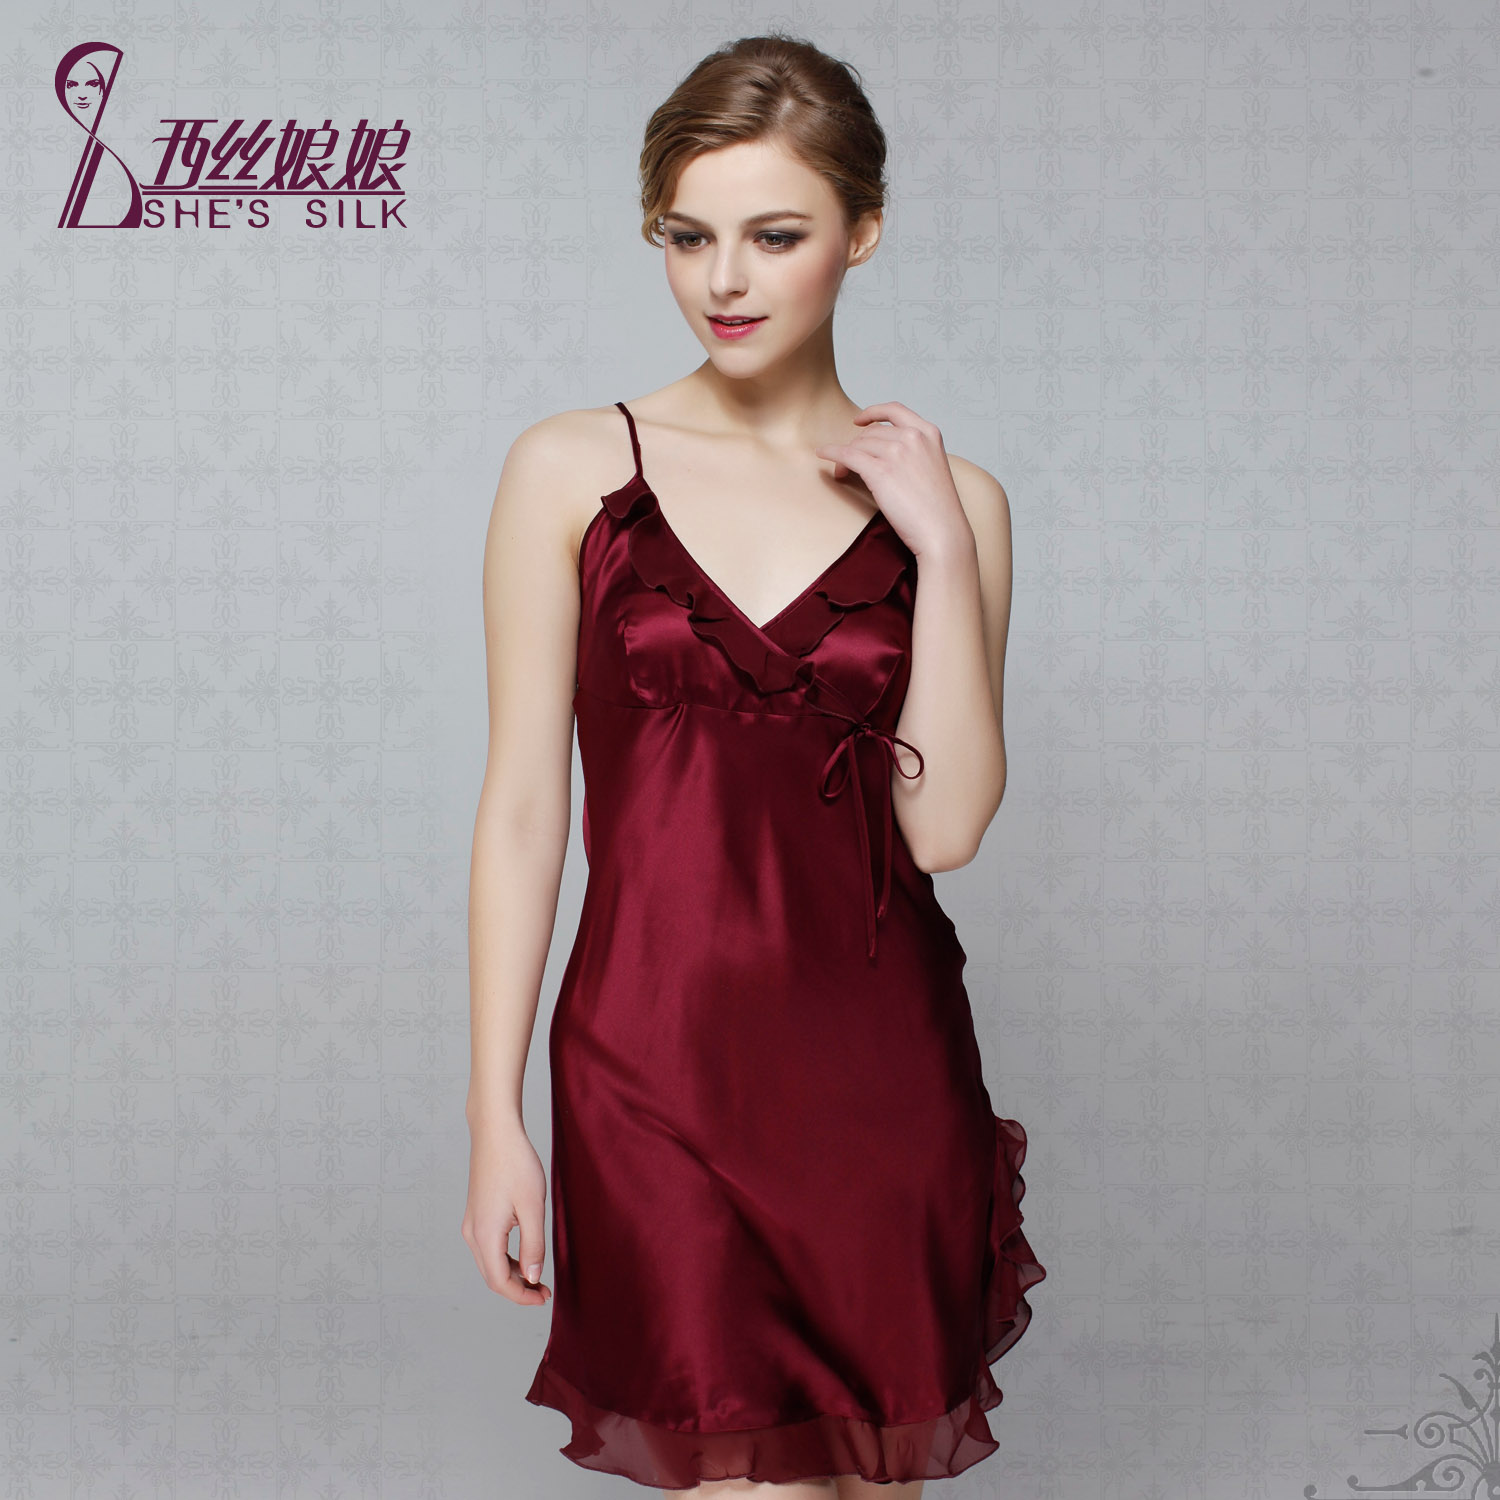 New Fashion Women's spring and summer mulberry silk sleepwear sexy spaghetti strap nightgown lounge Dresses